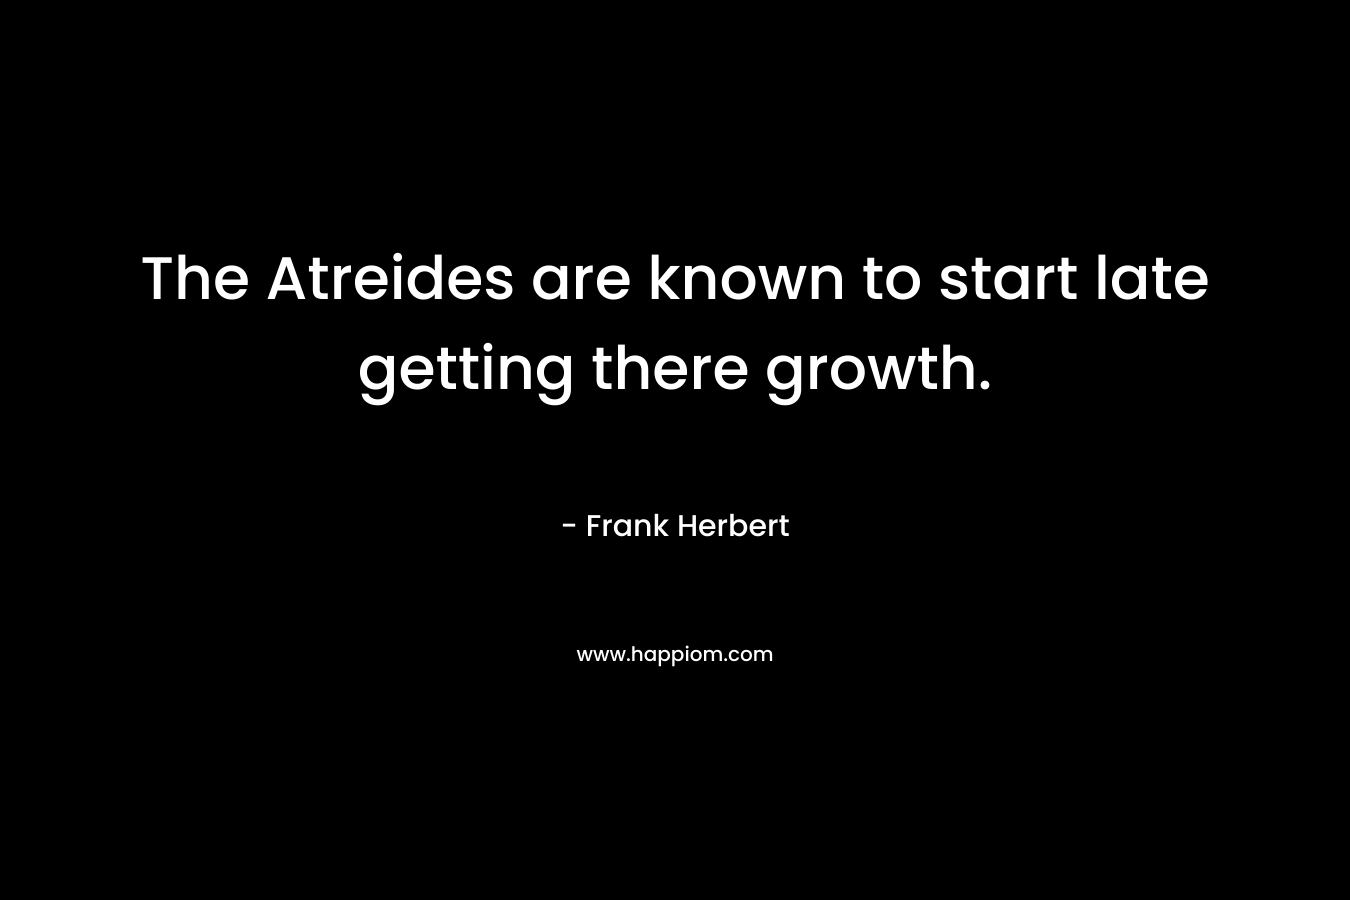 The Atreides are known to start late getting there growth. – Frank Herbert